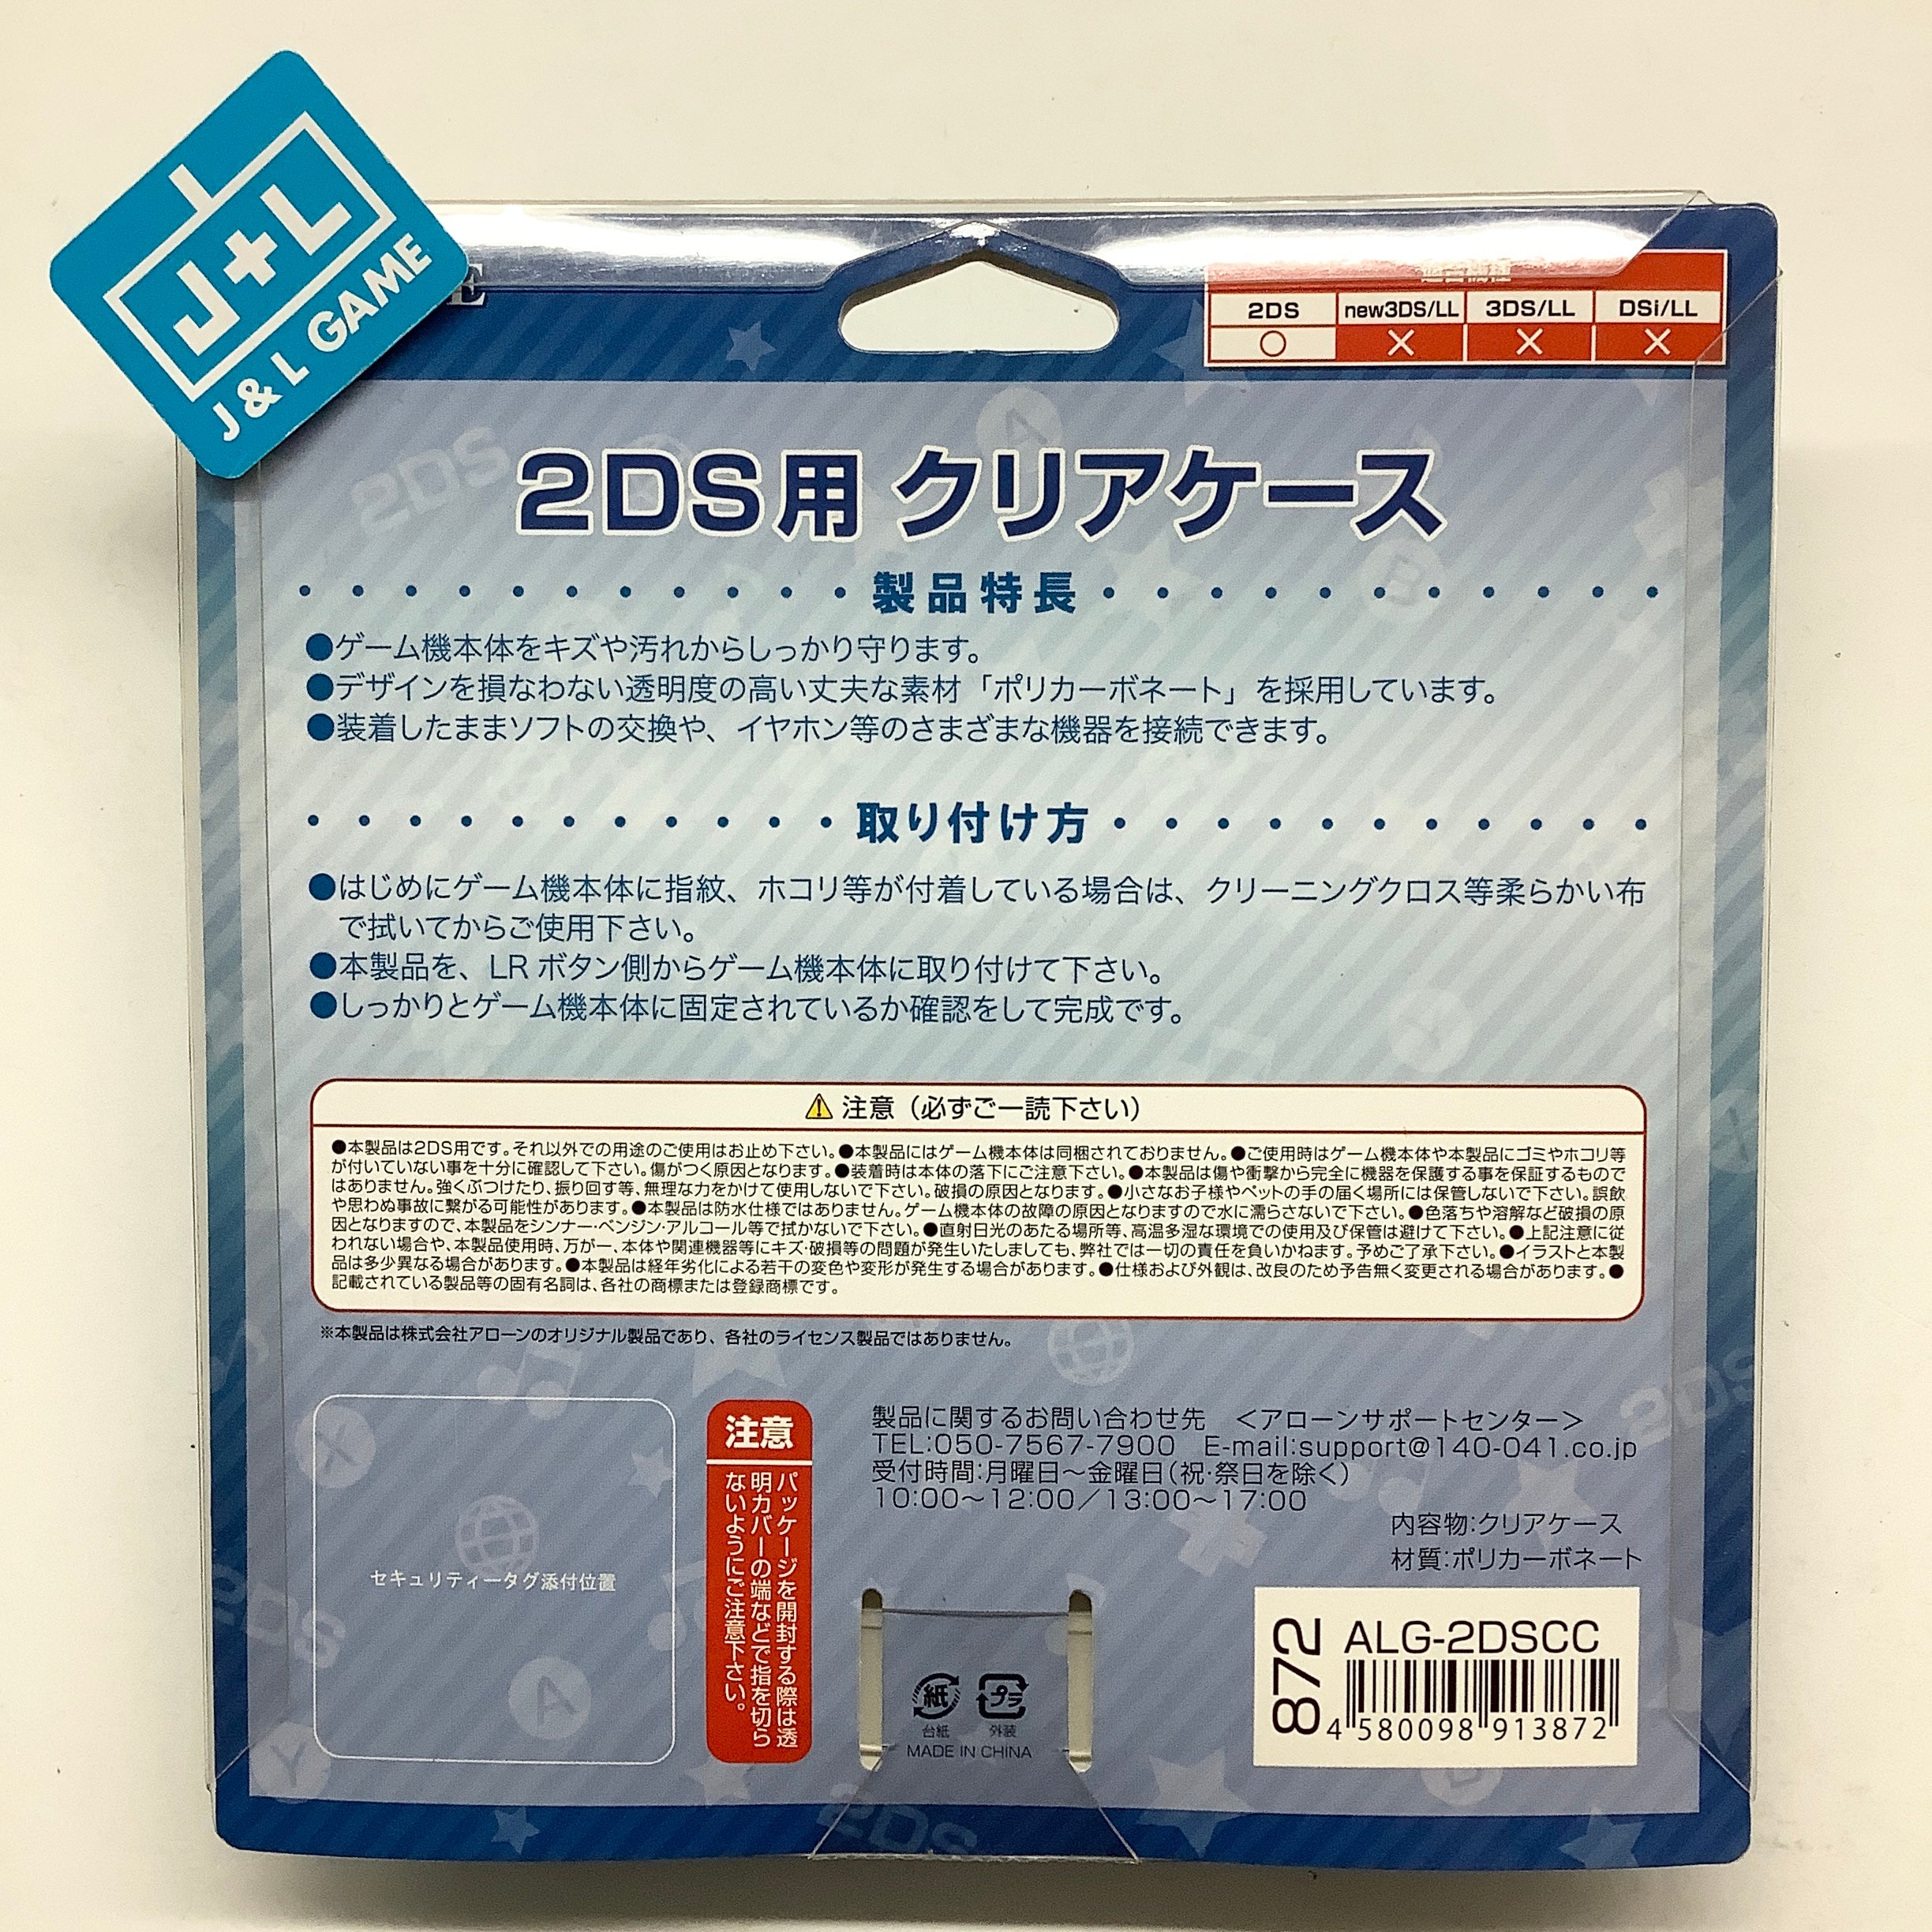 Nintendo 2DS Hard Clear Case - Nintendo 3DS ( Japanese Import ) Accessories Alone   